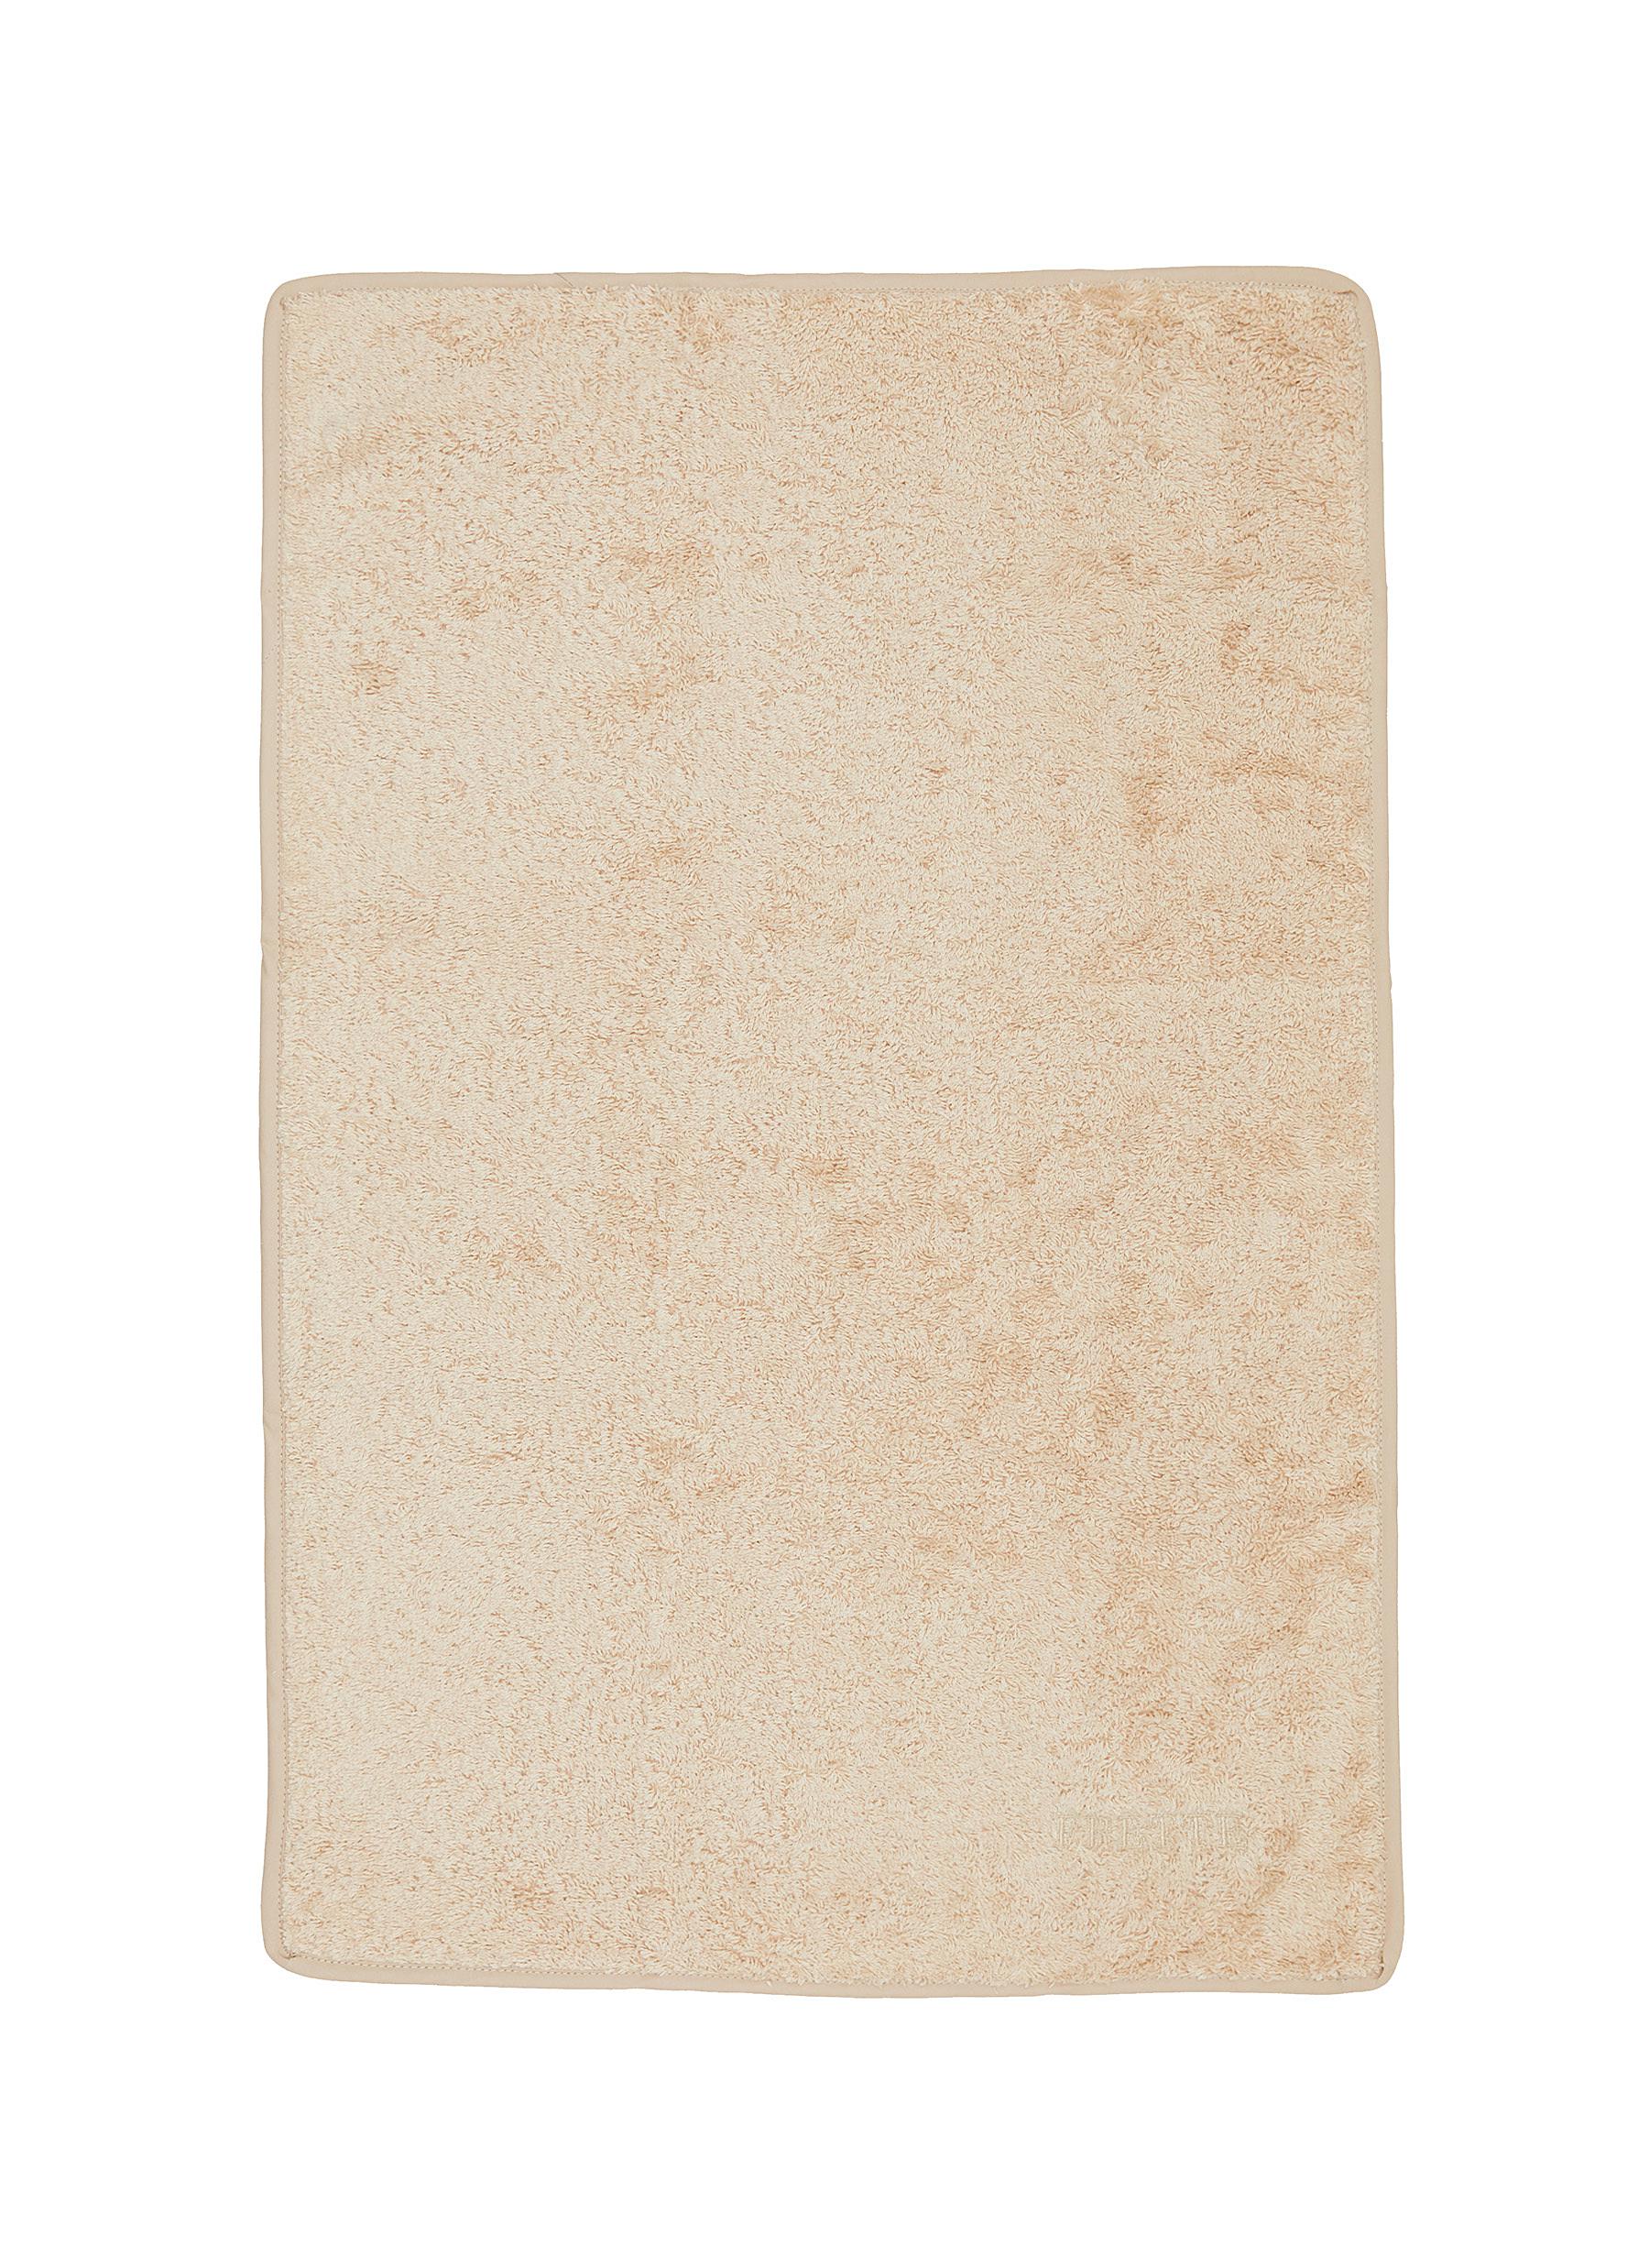 Unito Guest Towel - Savage Beige